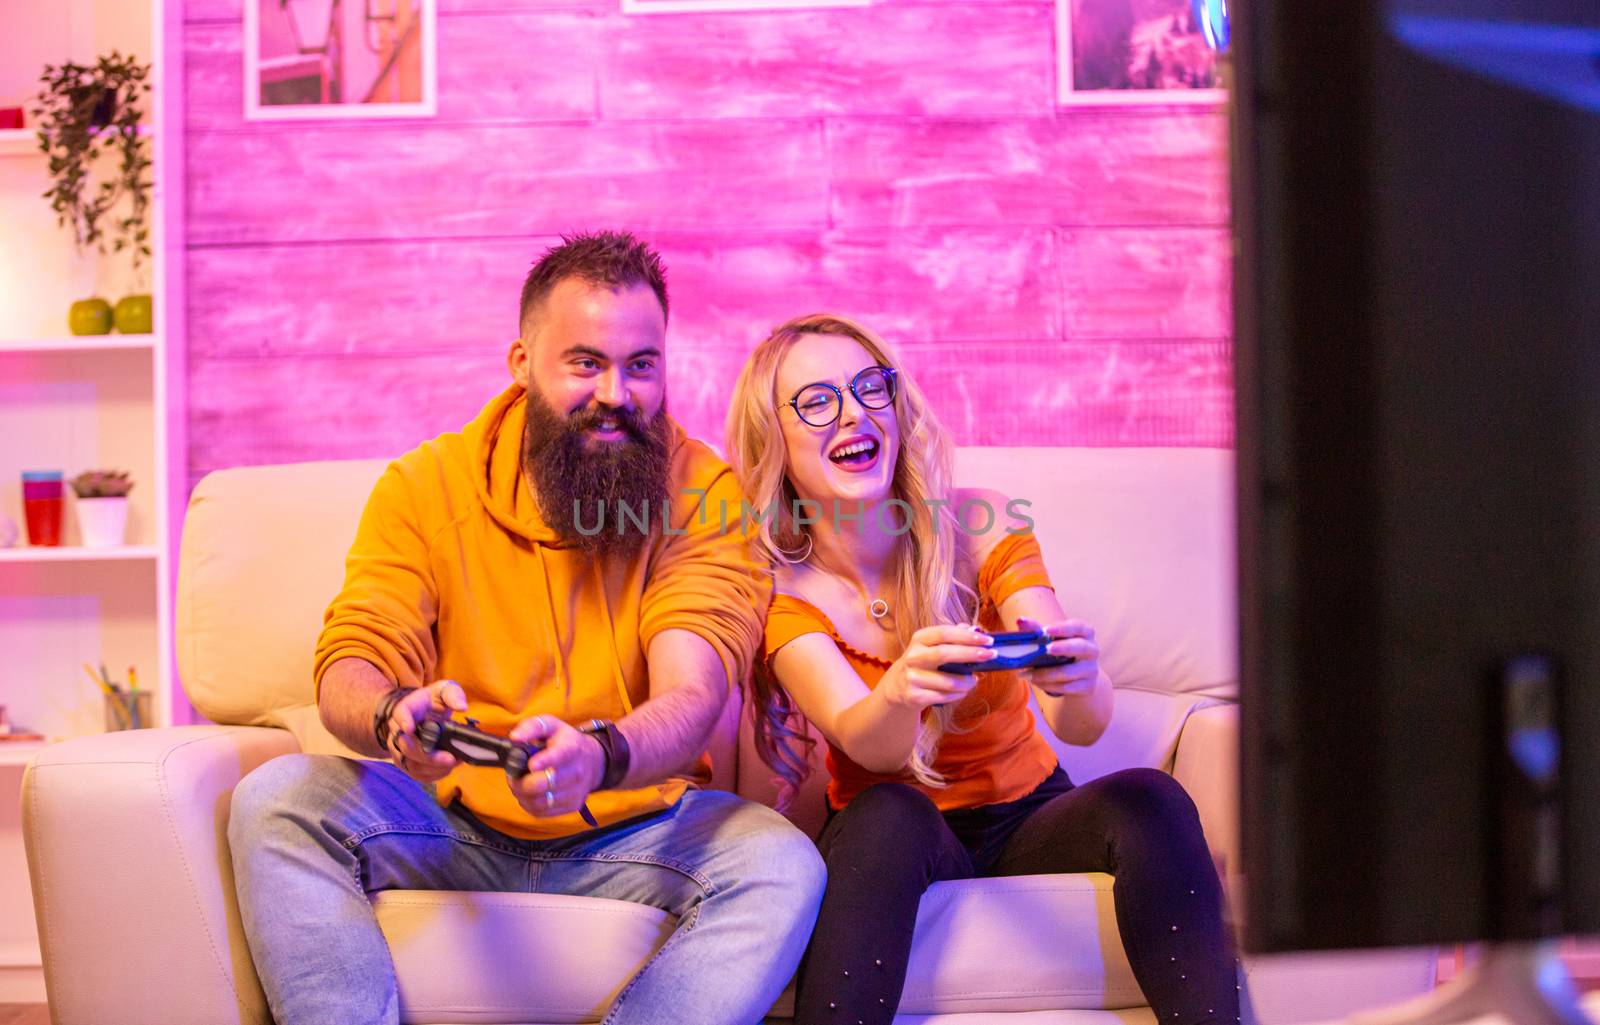 Beautiful blonde girl smiling while playing video games with her boyfriend using wireless controllers on a big screen TV